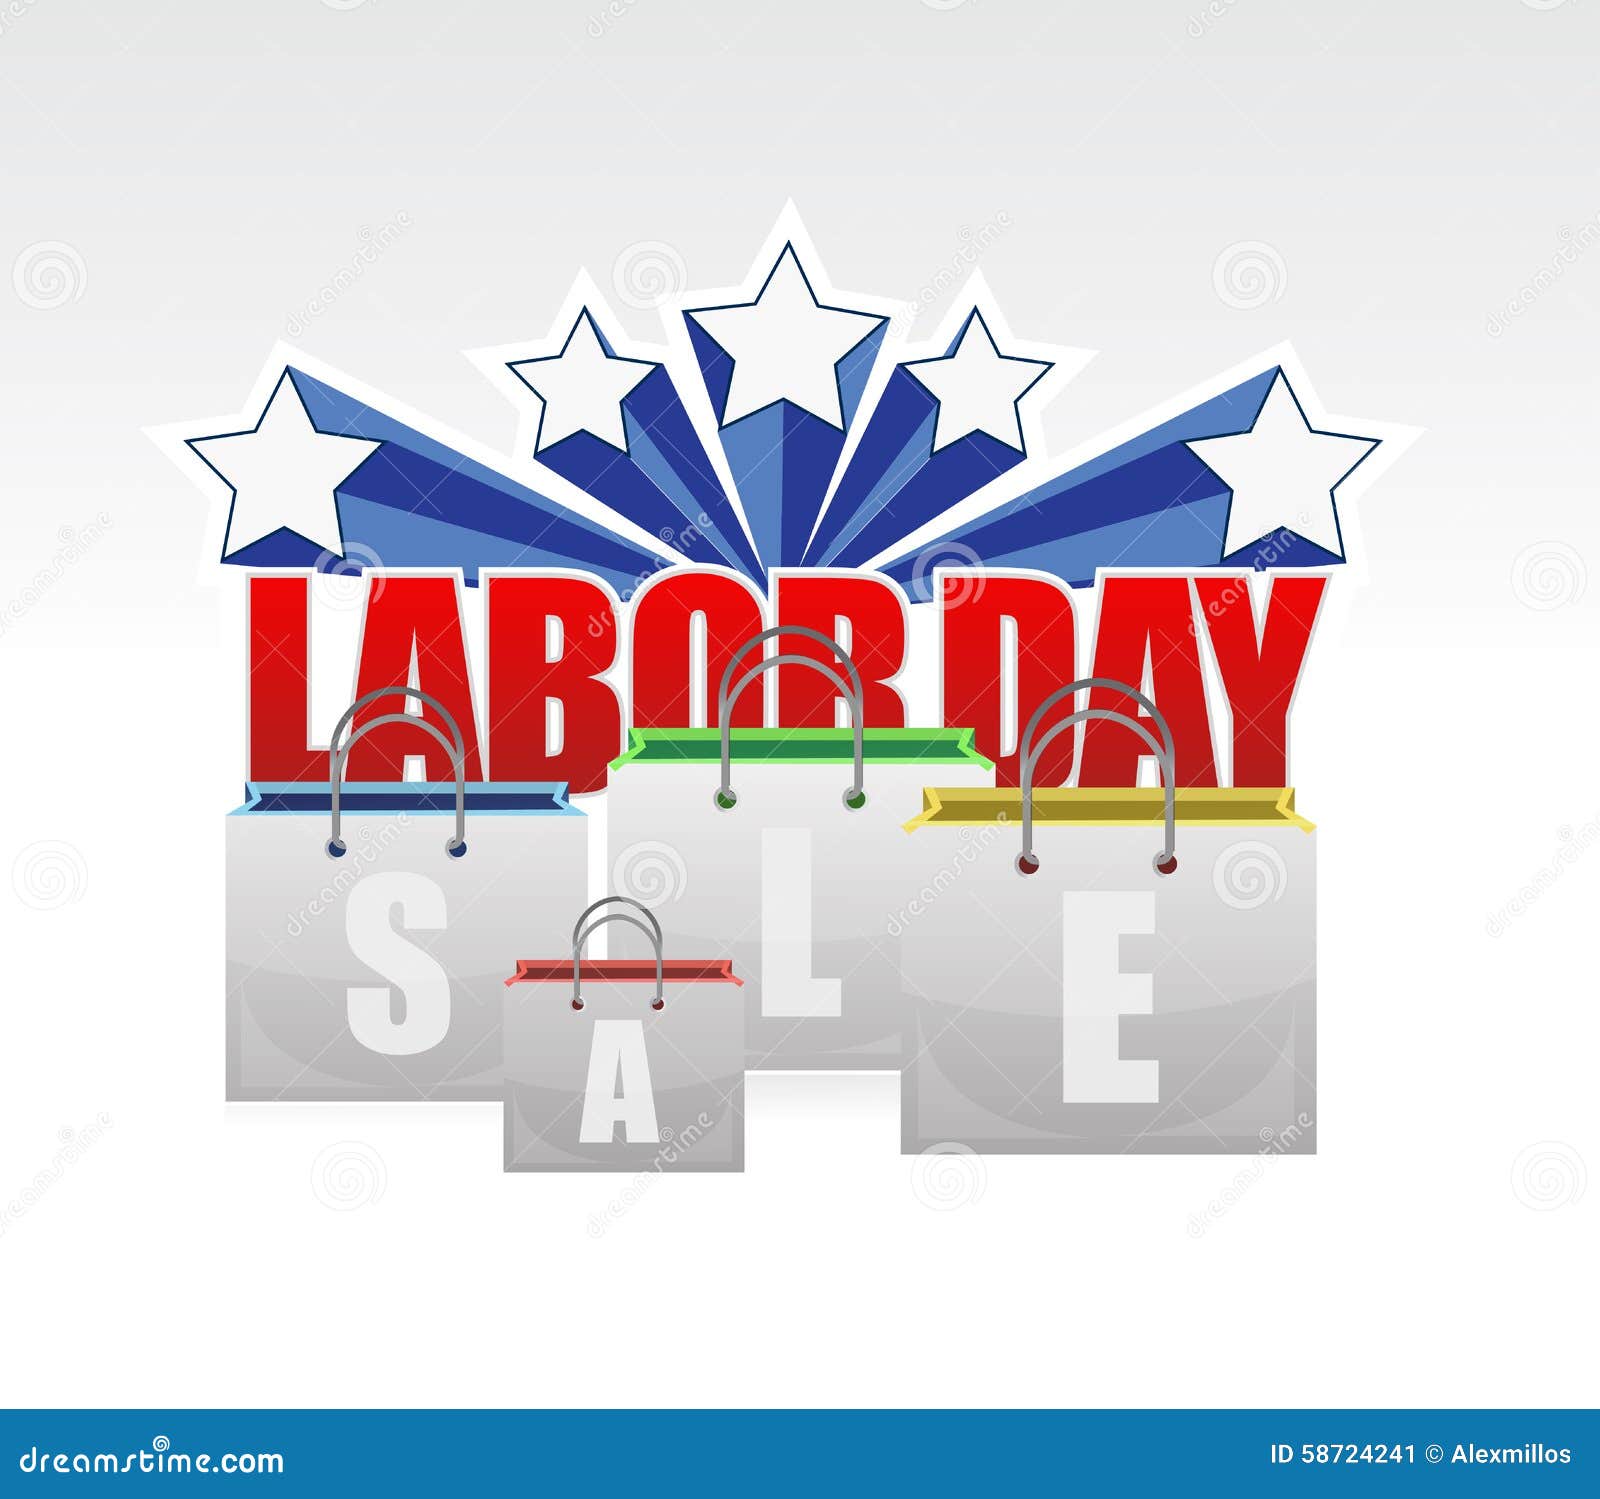 Labor Day Sale Shopping Bags Sign Stock Illustration - Illustration of lettering, icon: 58724241